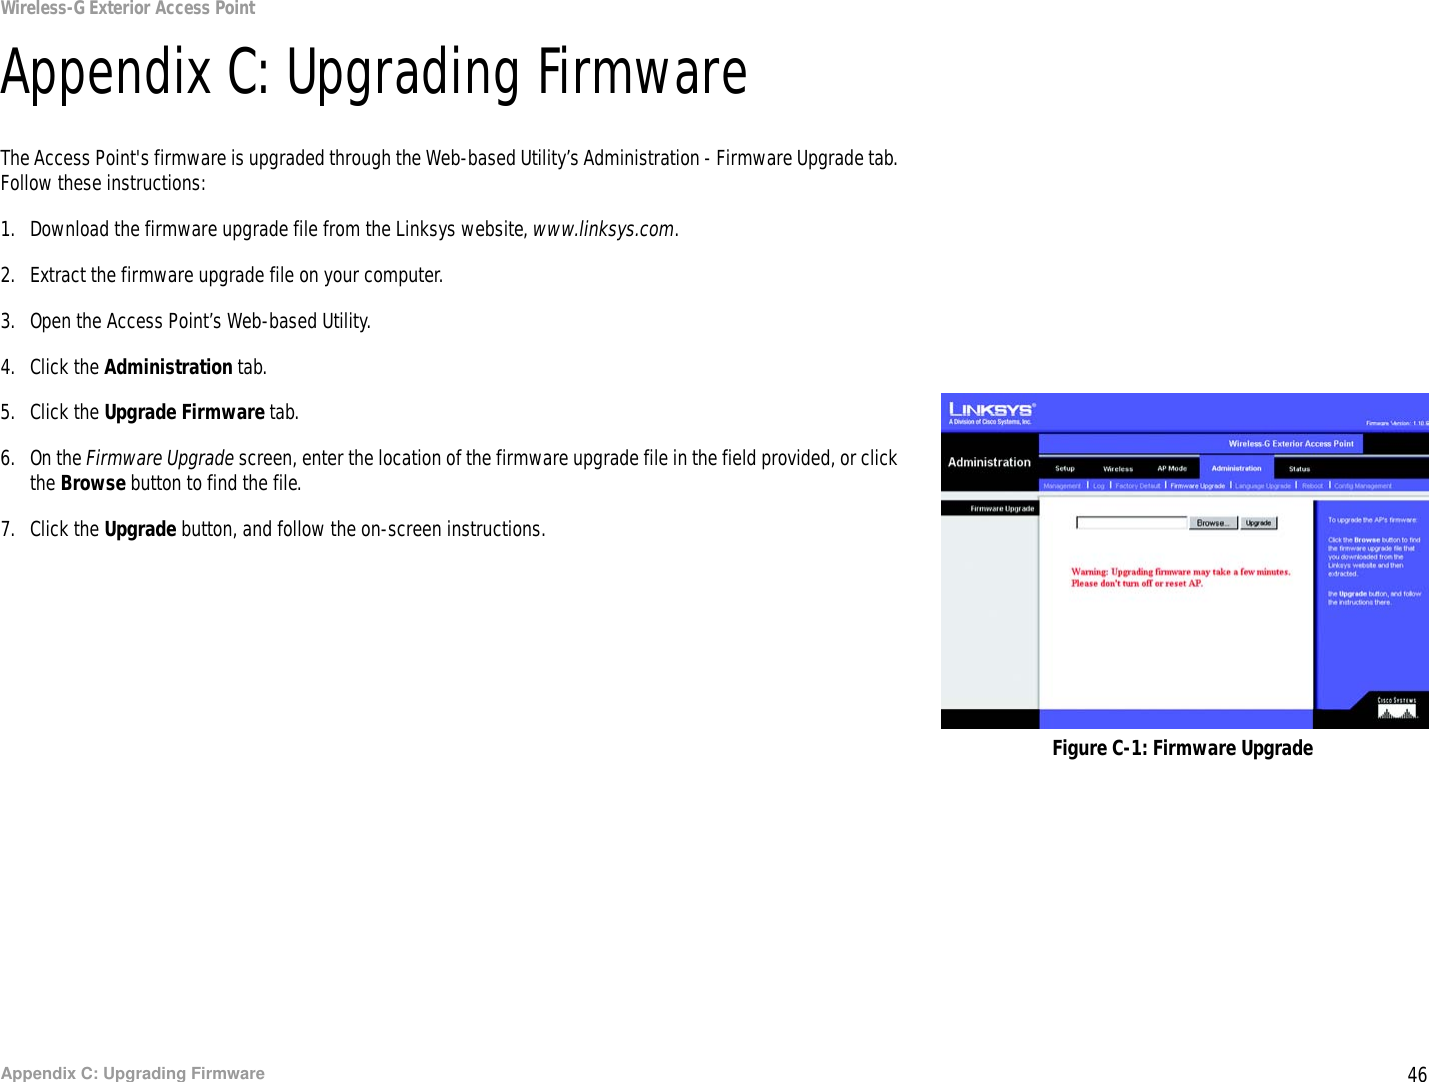 46Appendix C: Upgrading FirmwareWireless-G Exterior Access PointAppendix C: Upgrading FirmwareThe Access Point&apos;s firmware is upgraded through the Web-based Utility’s Administration - Firmware Upgrade tab. Follow these instructions:1. Download the firmware upgrade file from the Linksys website, www.linksys.com.2. Extract the firmware upgrade file on your computer.3. Open the Access Point’s Web-based Utility.4. Click the Administration tab.5. Click the Upgrade Firmware tab.6. On the Firmware Upgrade screen, enter the location of the firmware upgrade file in the field provided, or click the Browse button to find the file.7. Click the Upgrade button, and follow the on-screen instructions.Figure C-1: Firmware Upgrade